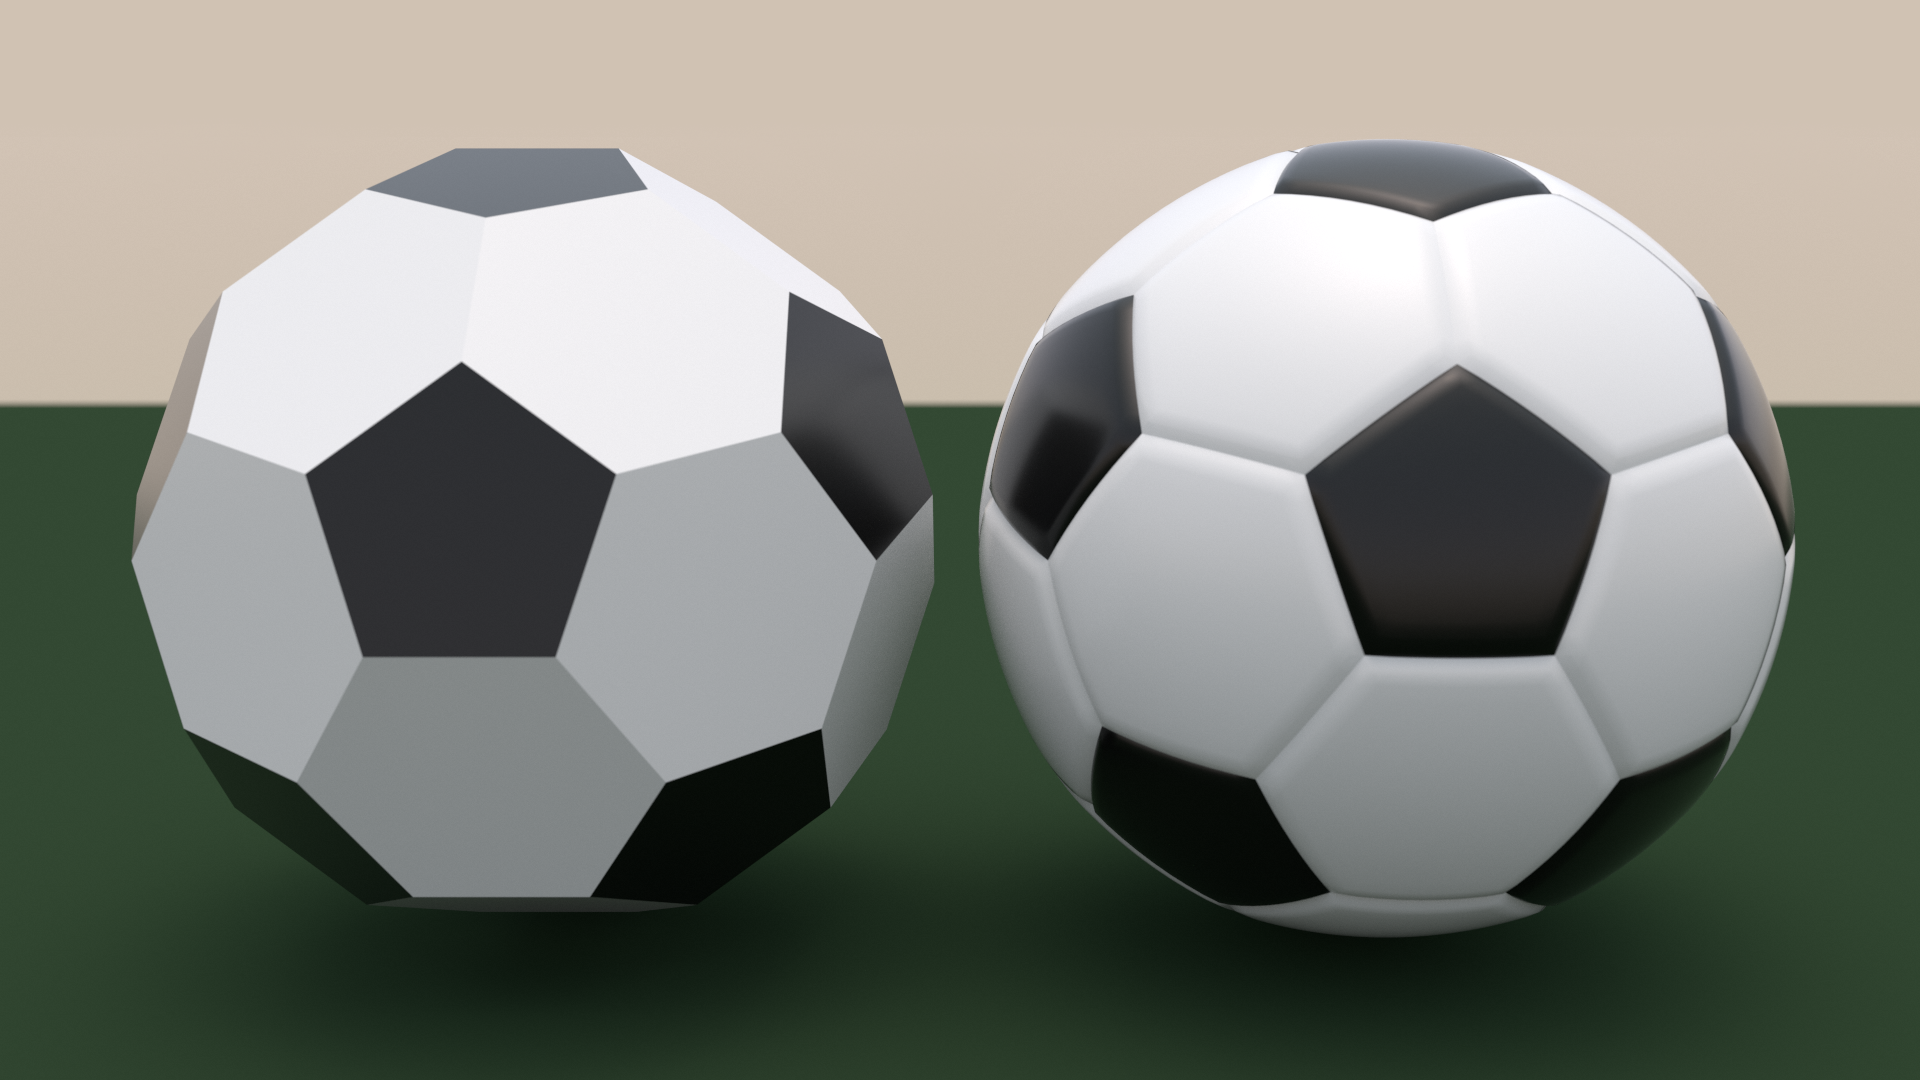 Comparison_of_truncated_icosahedron_and_soccer_ball